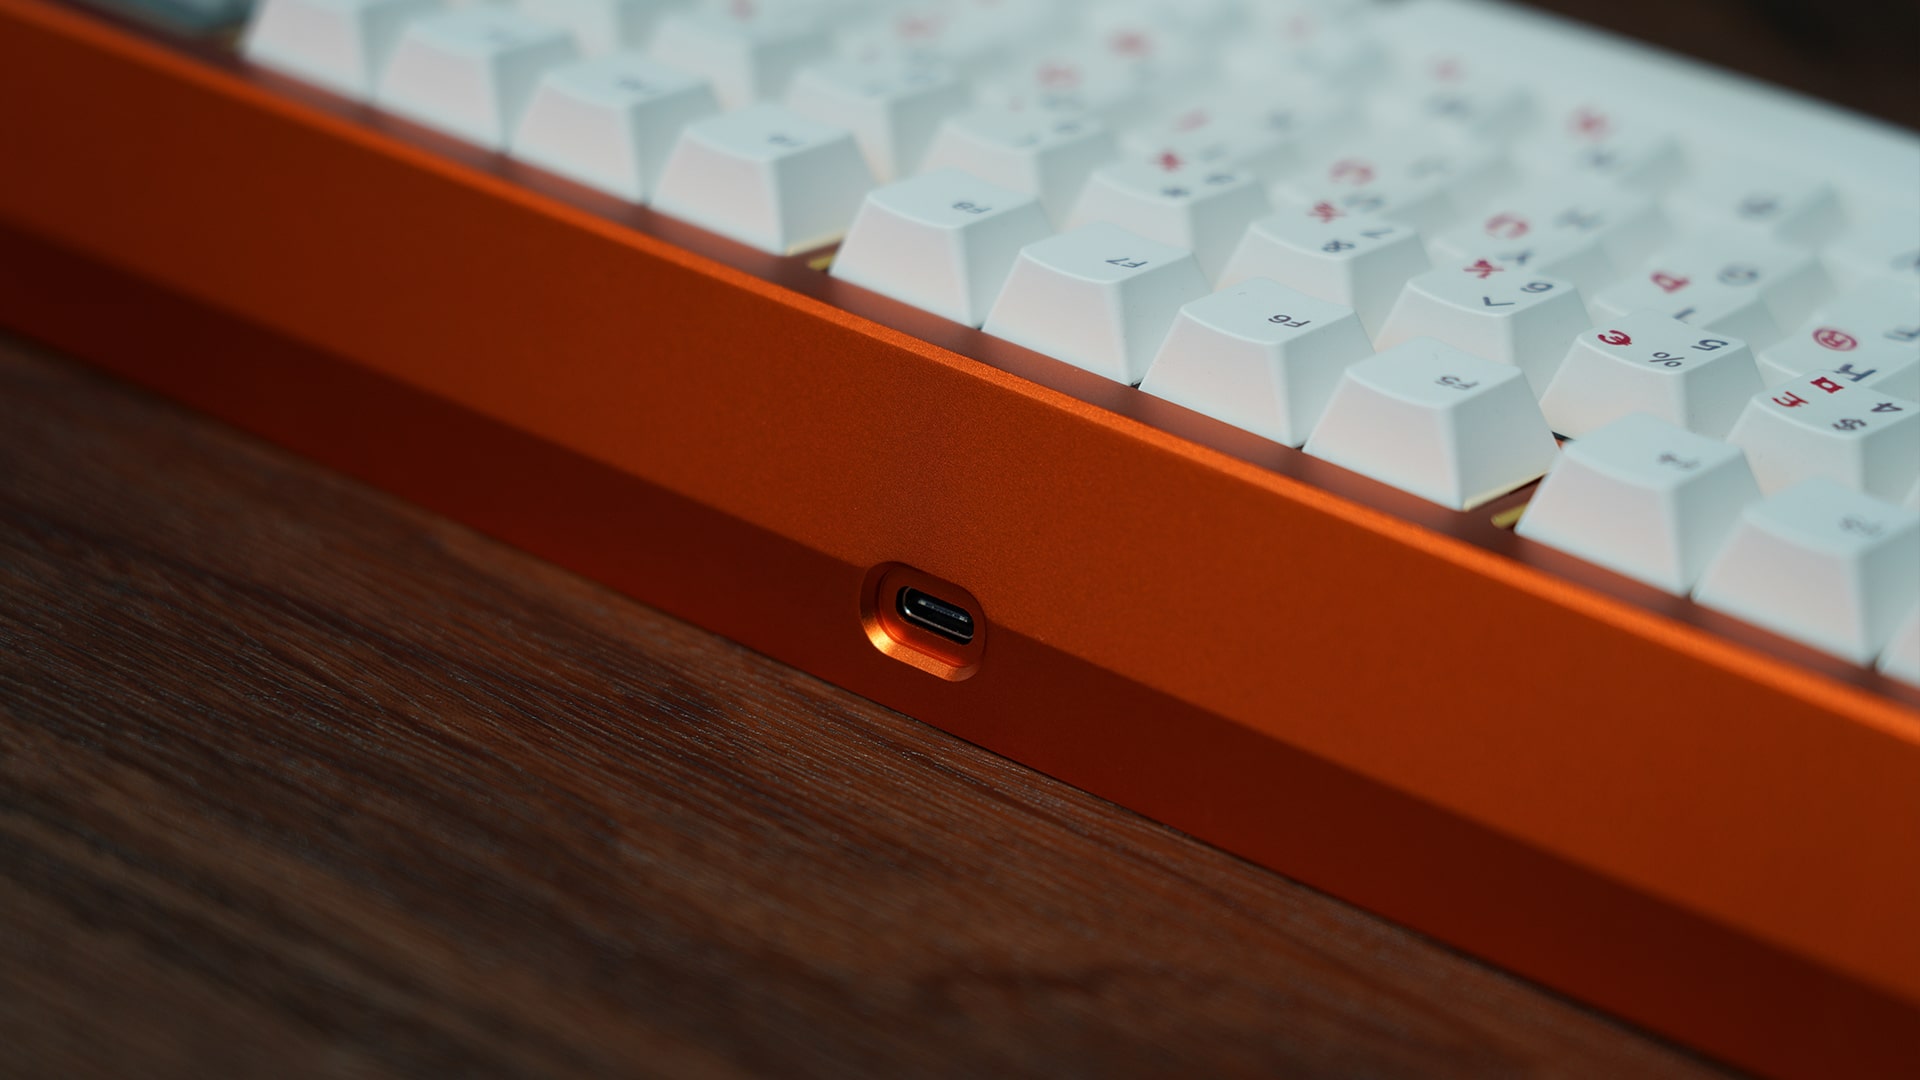 [Extra GB] [Oct] Zoom75 Keyboard Special Edition - Case Anodized Orange